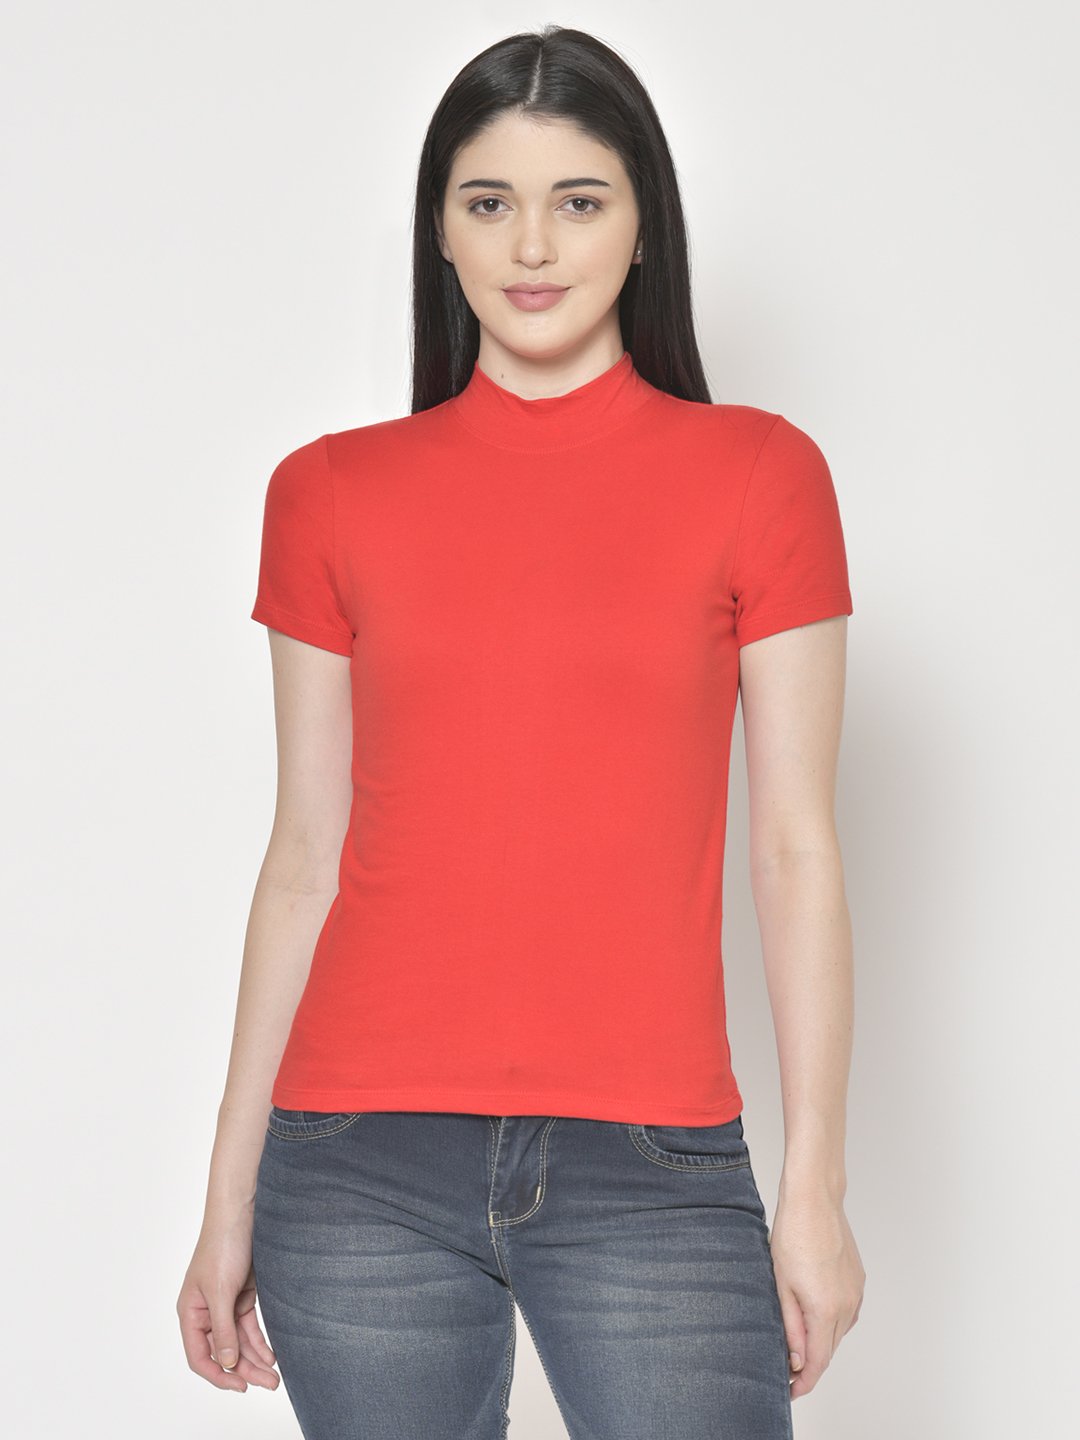 Cation Red Cotton Top